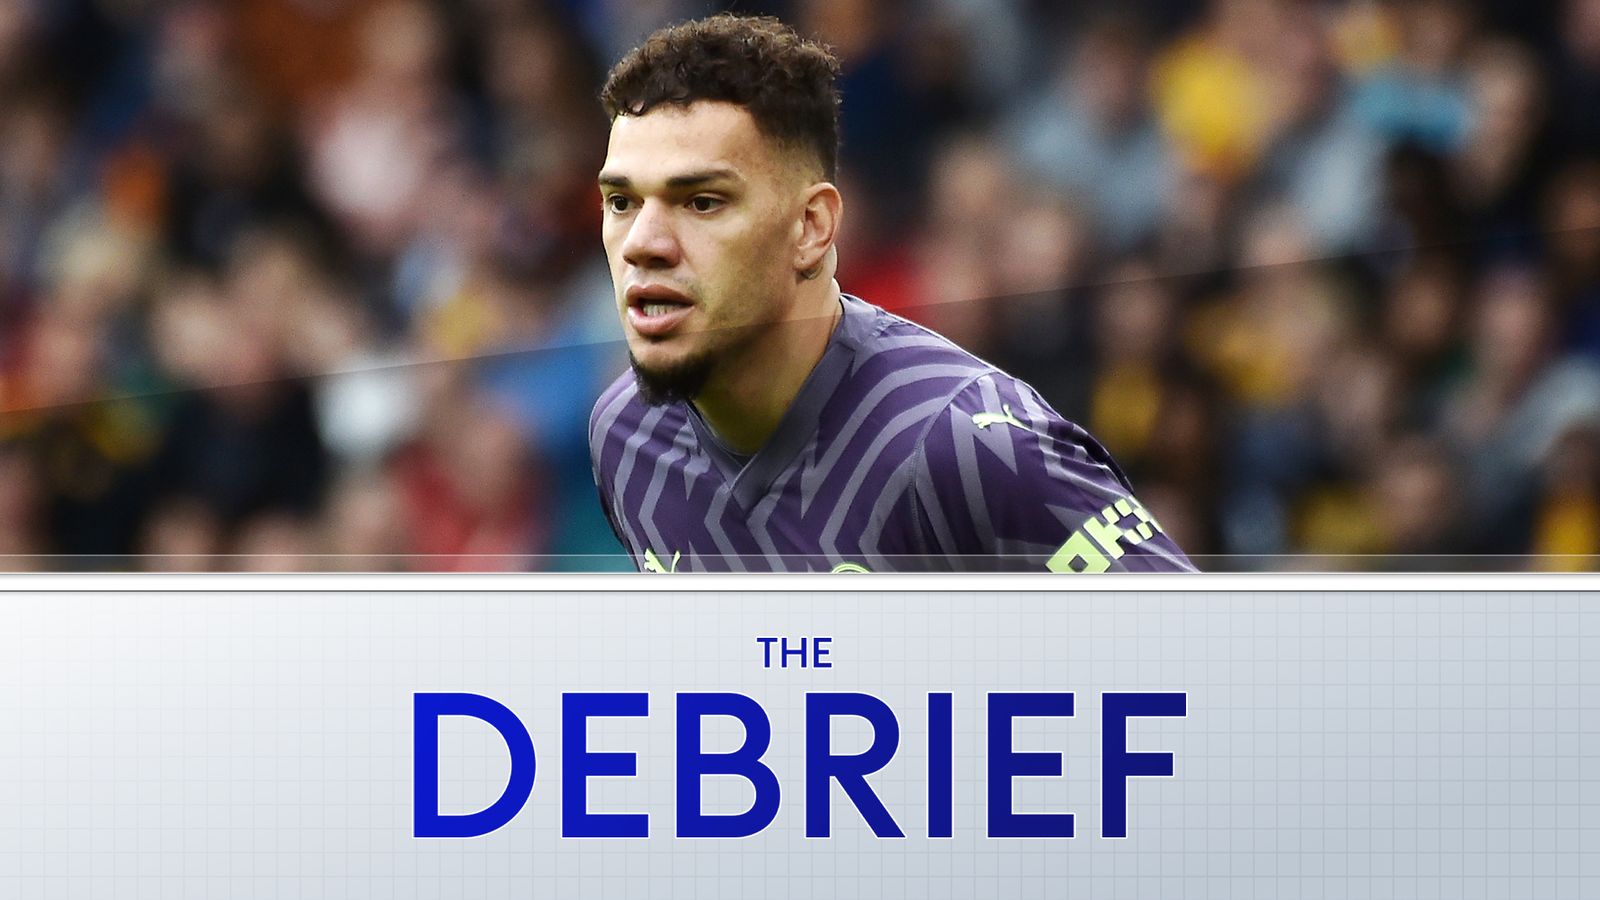 The Debrief: Ederson’s pass precision, Everton’s finishing and VAR frustrations